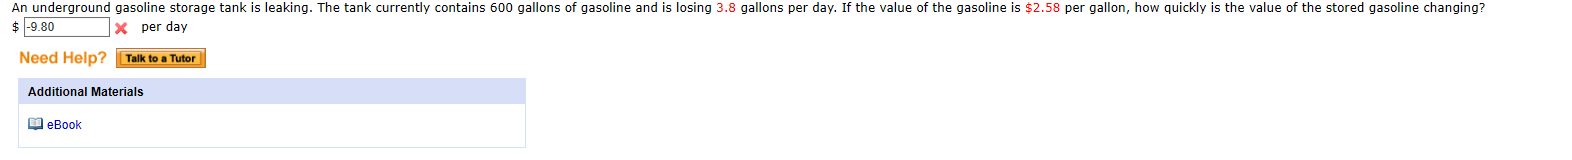 An underground gasoline storage tank is leaking. The tank currently contains 600 gallons of gasoline and is losing 3.8 gallons per day. If the value of the gasoline is $2.58 per gallon, how quickly is the value of the stored gasoline changing?
$ -9.80
X per day
Need Help?
Talk to a Tutor
Additional Materials
M eBook
